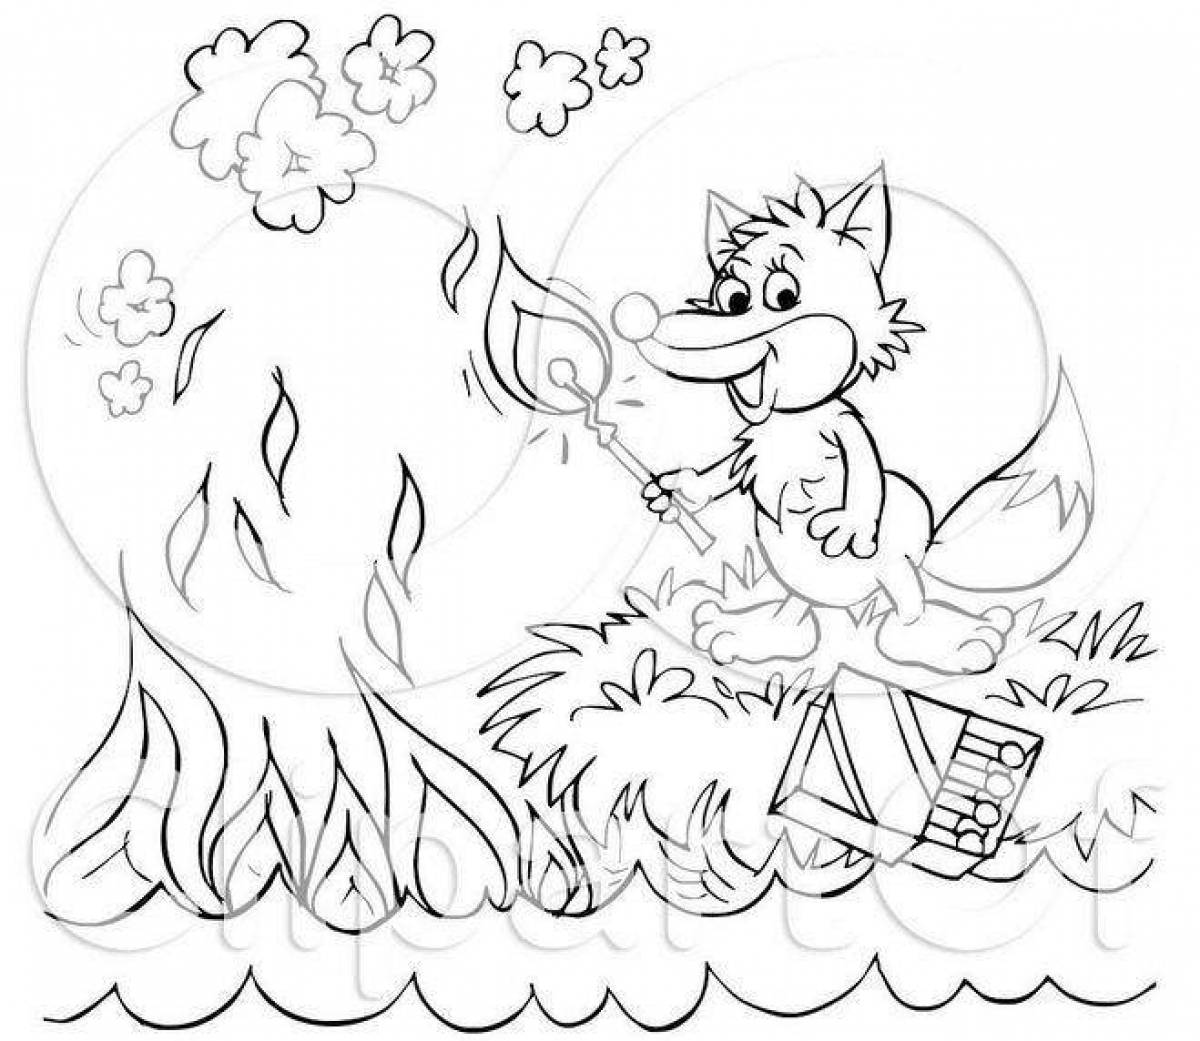 Roaring fire in the forest coloring page